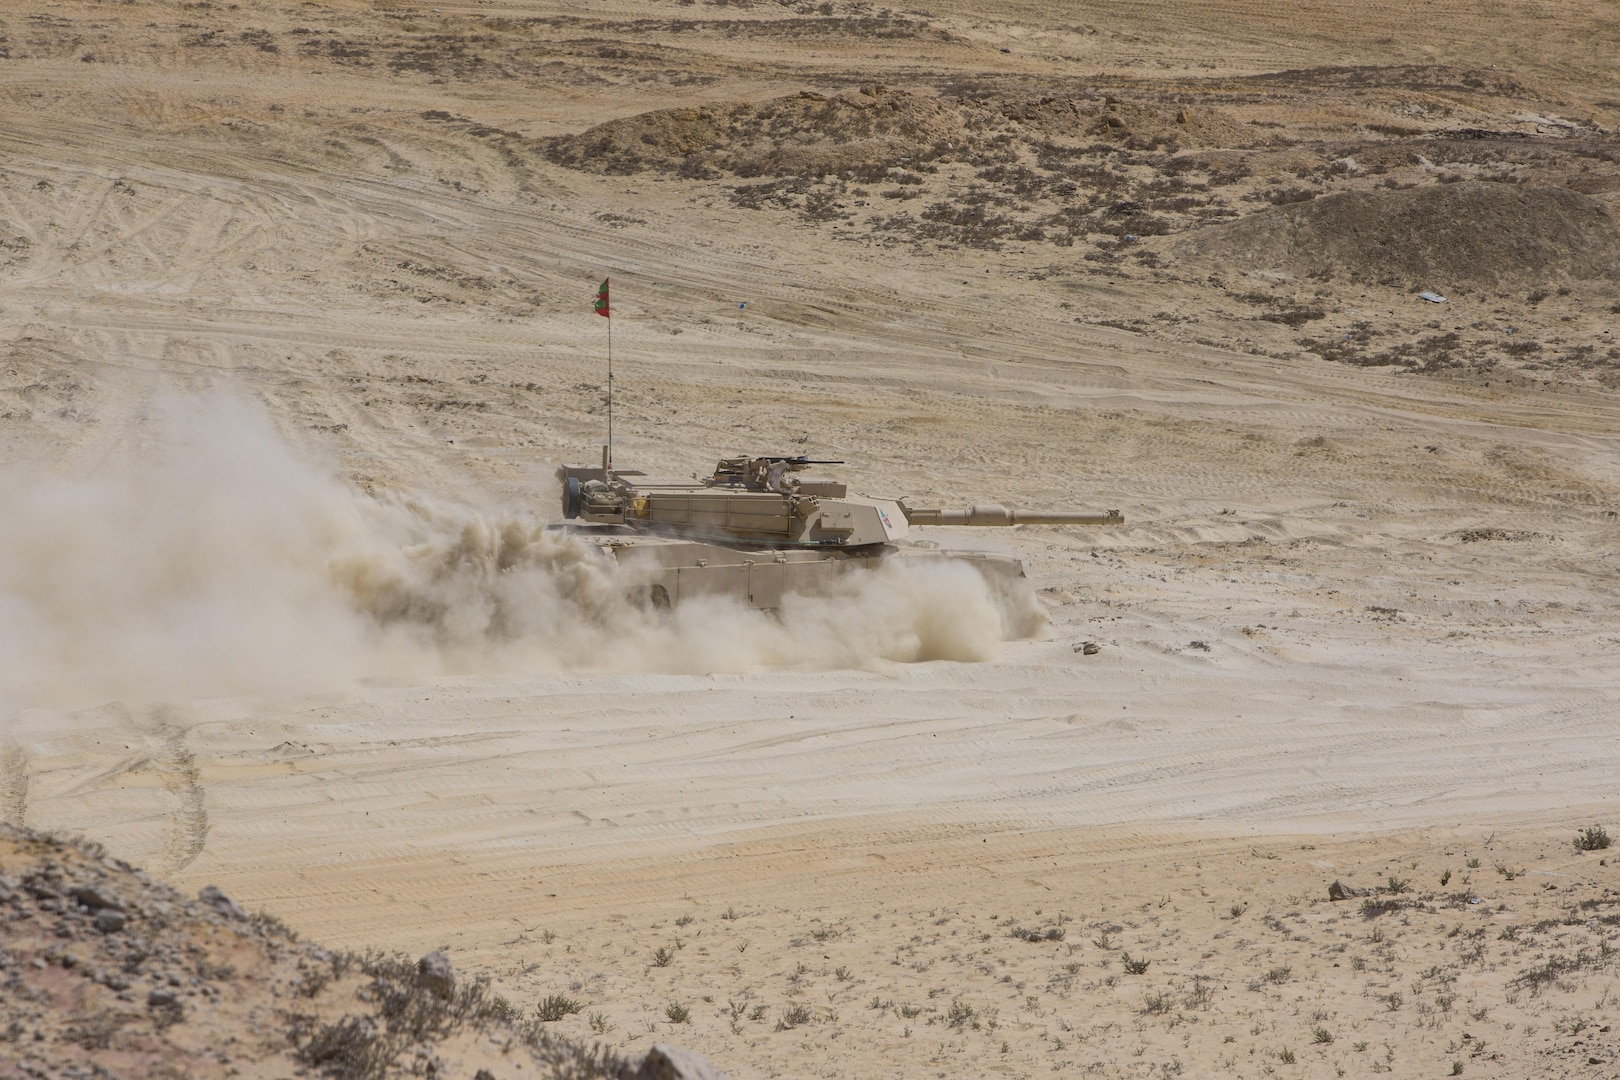 An Egyptian Army M1A1 Abrams battle tank rolls onto a simulated battlefield during the final combined arms live fire exercise of Bright Star 2017. Exercise Bright Star 2017 is a bilateral U.S. Central Command command-post exercise, field training exercise and senior leader seminar, held with the Arab Republic of Egypt. Participation strengthens military-to-military relationships between U.S. and Egyptian forces in the Central Command area of responsibility. The exercise enhances regional security and stability by responding to modern-day security scenarios. (U.S. Department of Defense photo by Tom Gagnier)